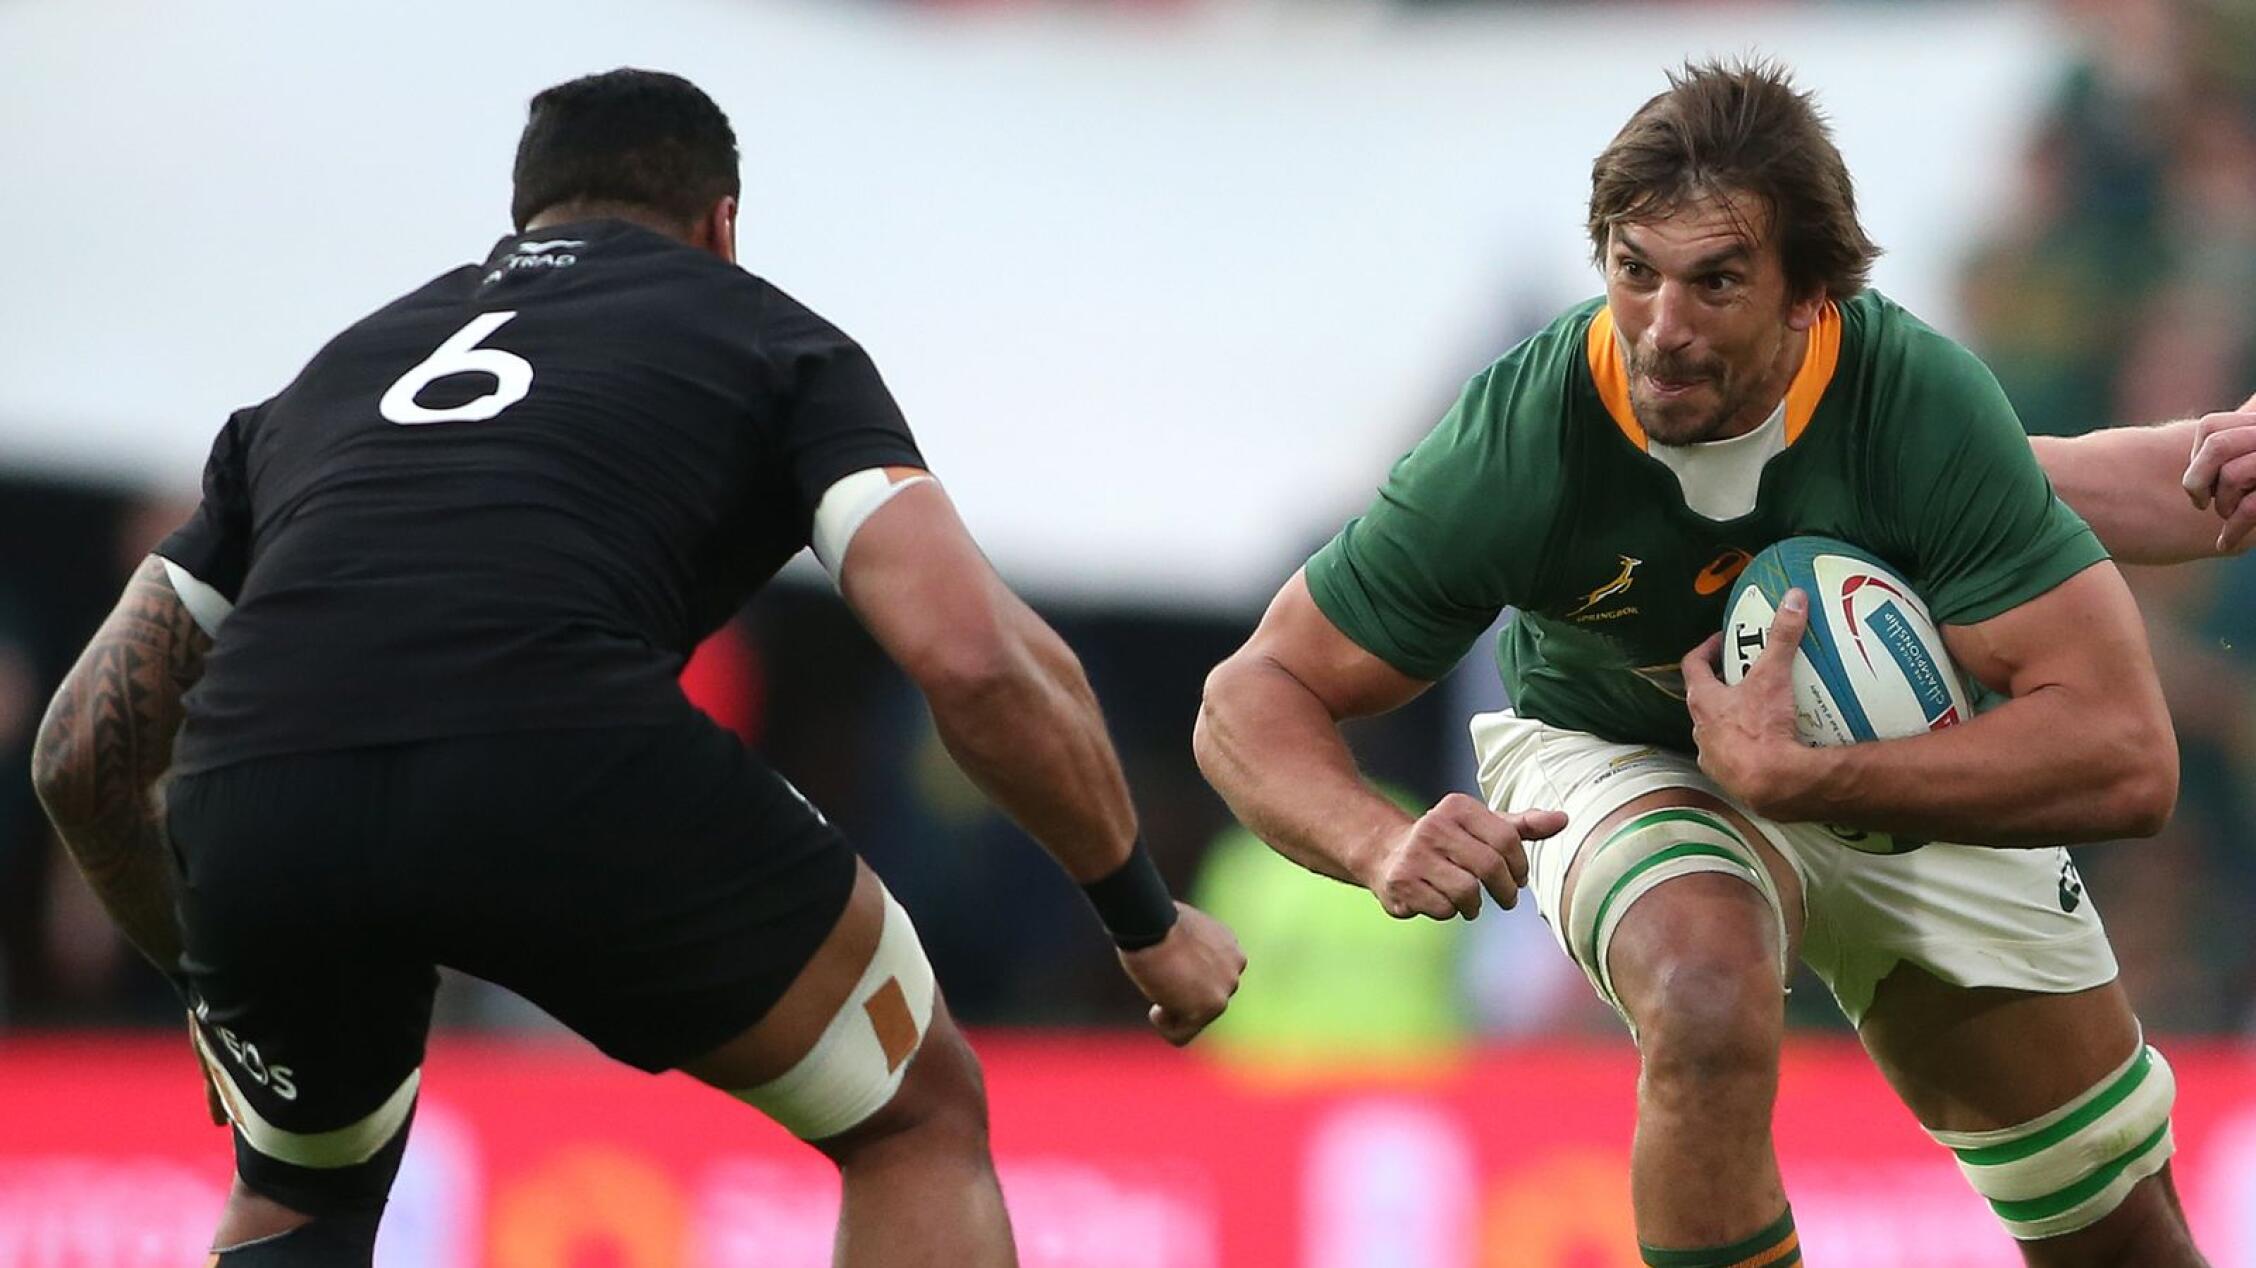 Eben Etzebeth of South Africa attempts to get past Shannon Frizell of New Zealand during the 2022 Castle Lager Rugby Championship match between South Africa and New Zealand held at Ellis Park in Johannesburg